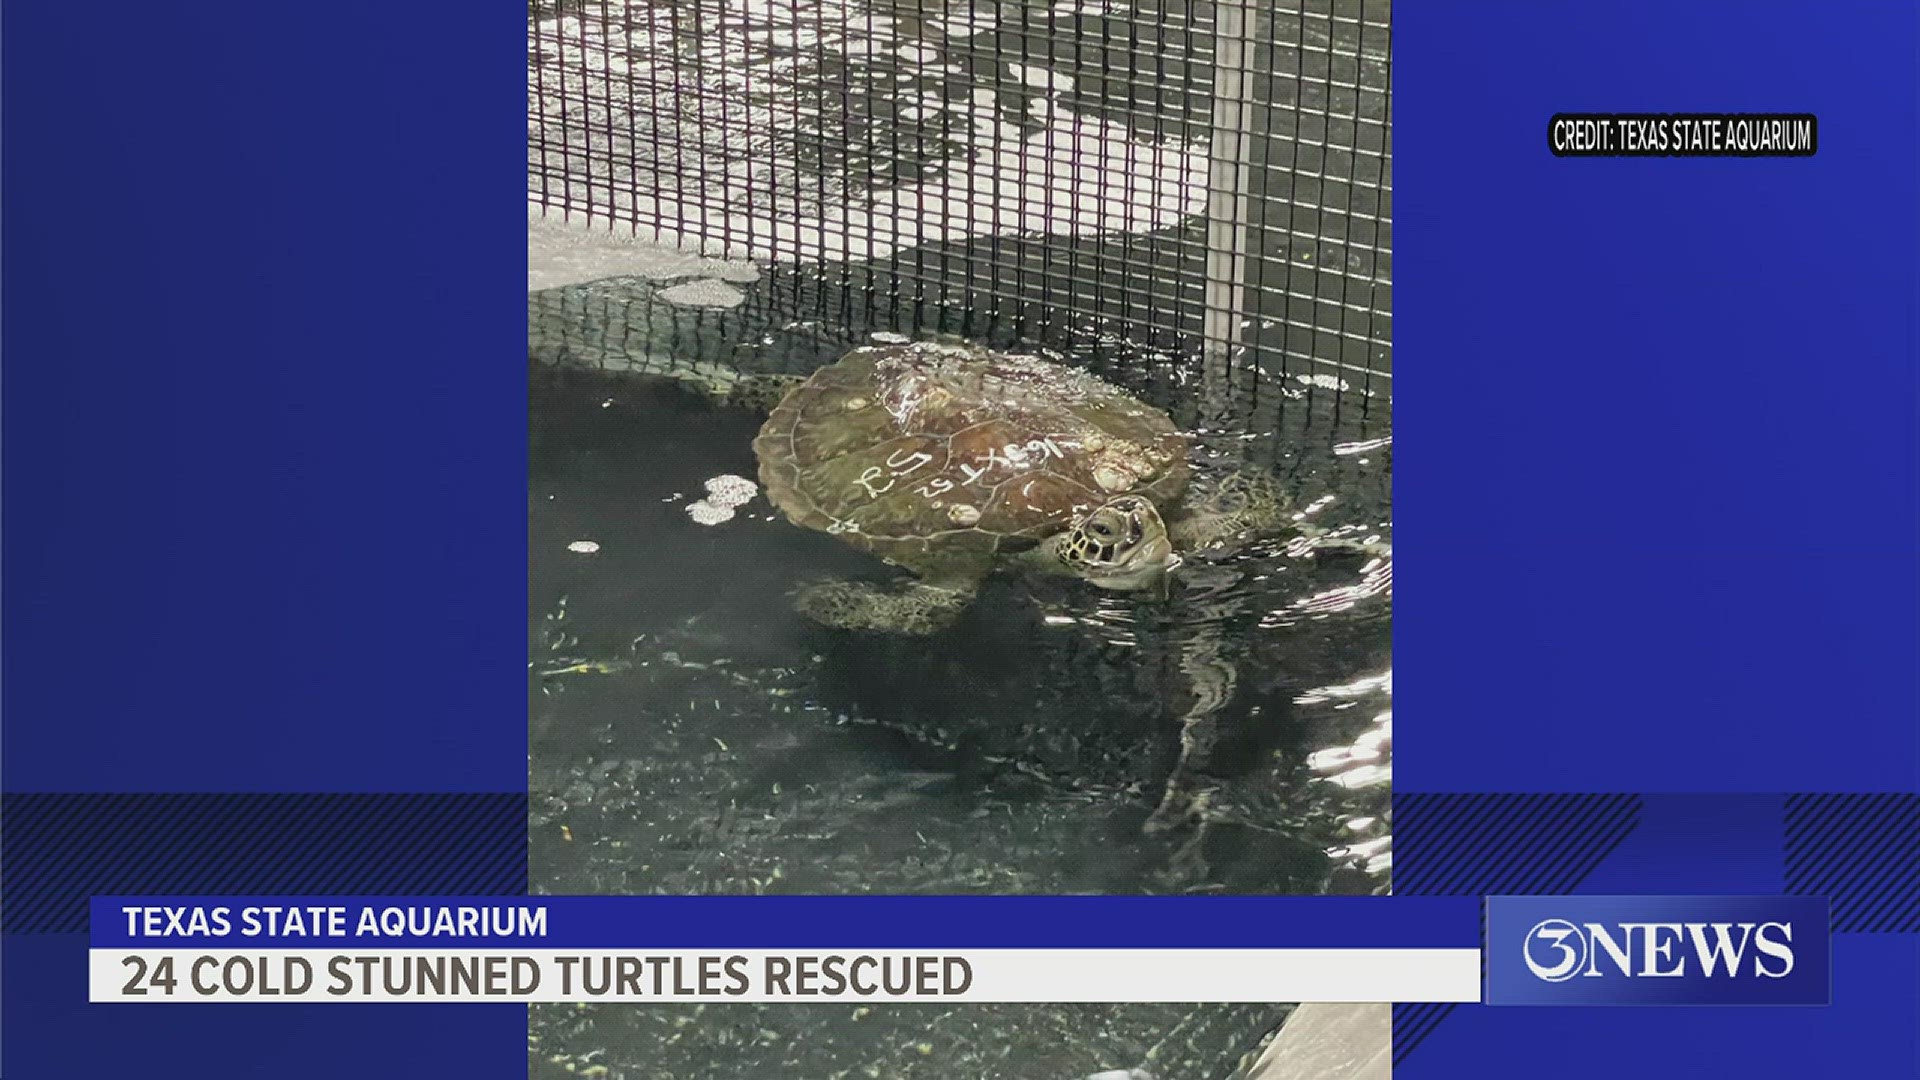 Officials said the green sea turtles were found in the upper Laguna Madre.